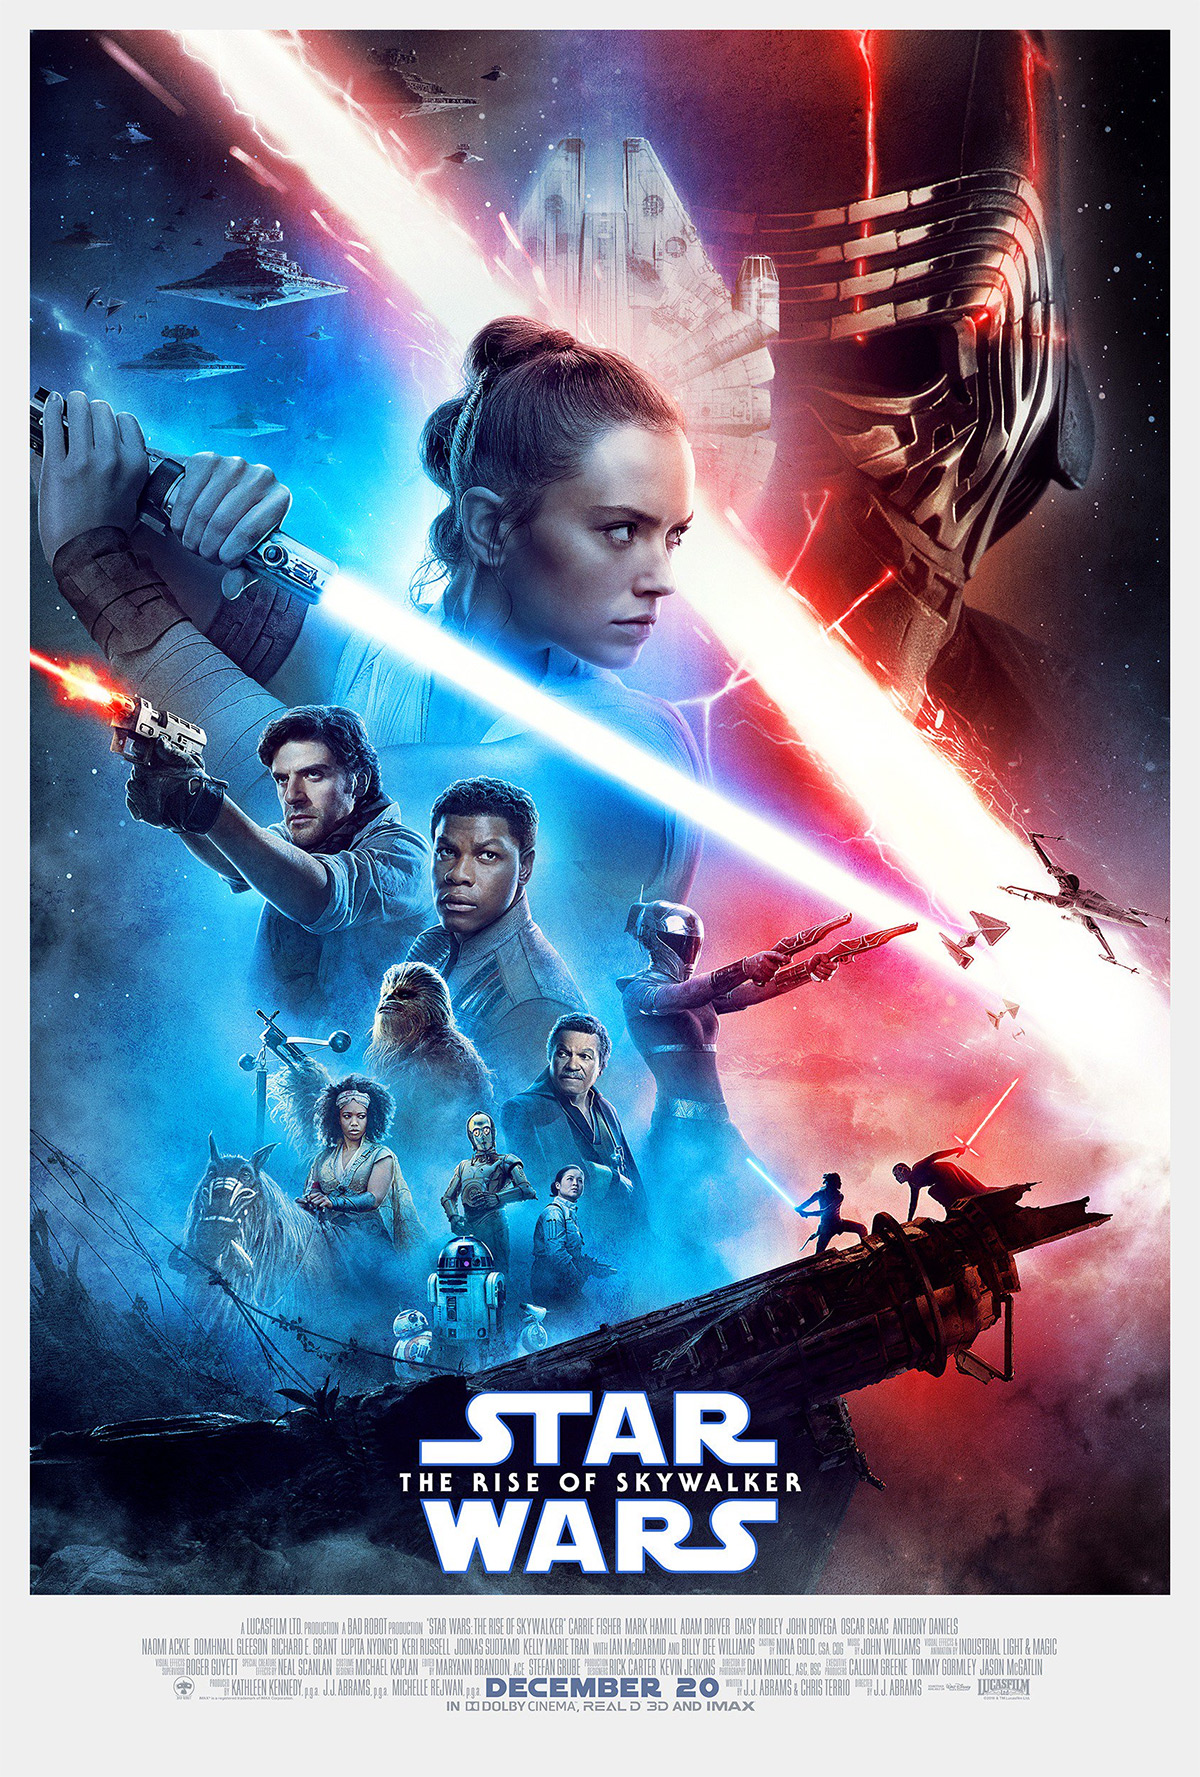 Star Wars: The Rise of Skywalker Posters